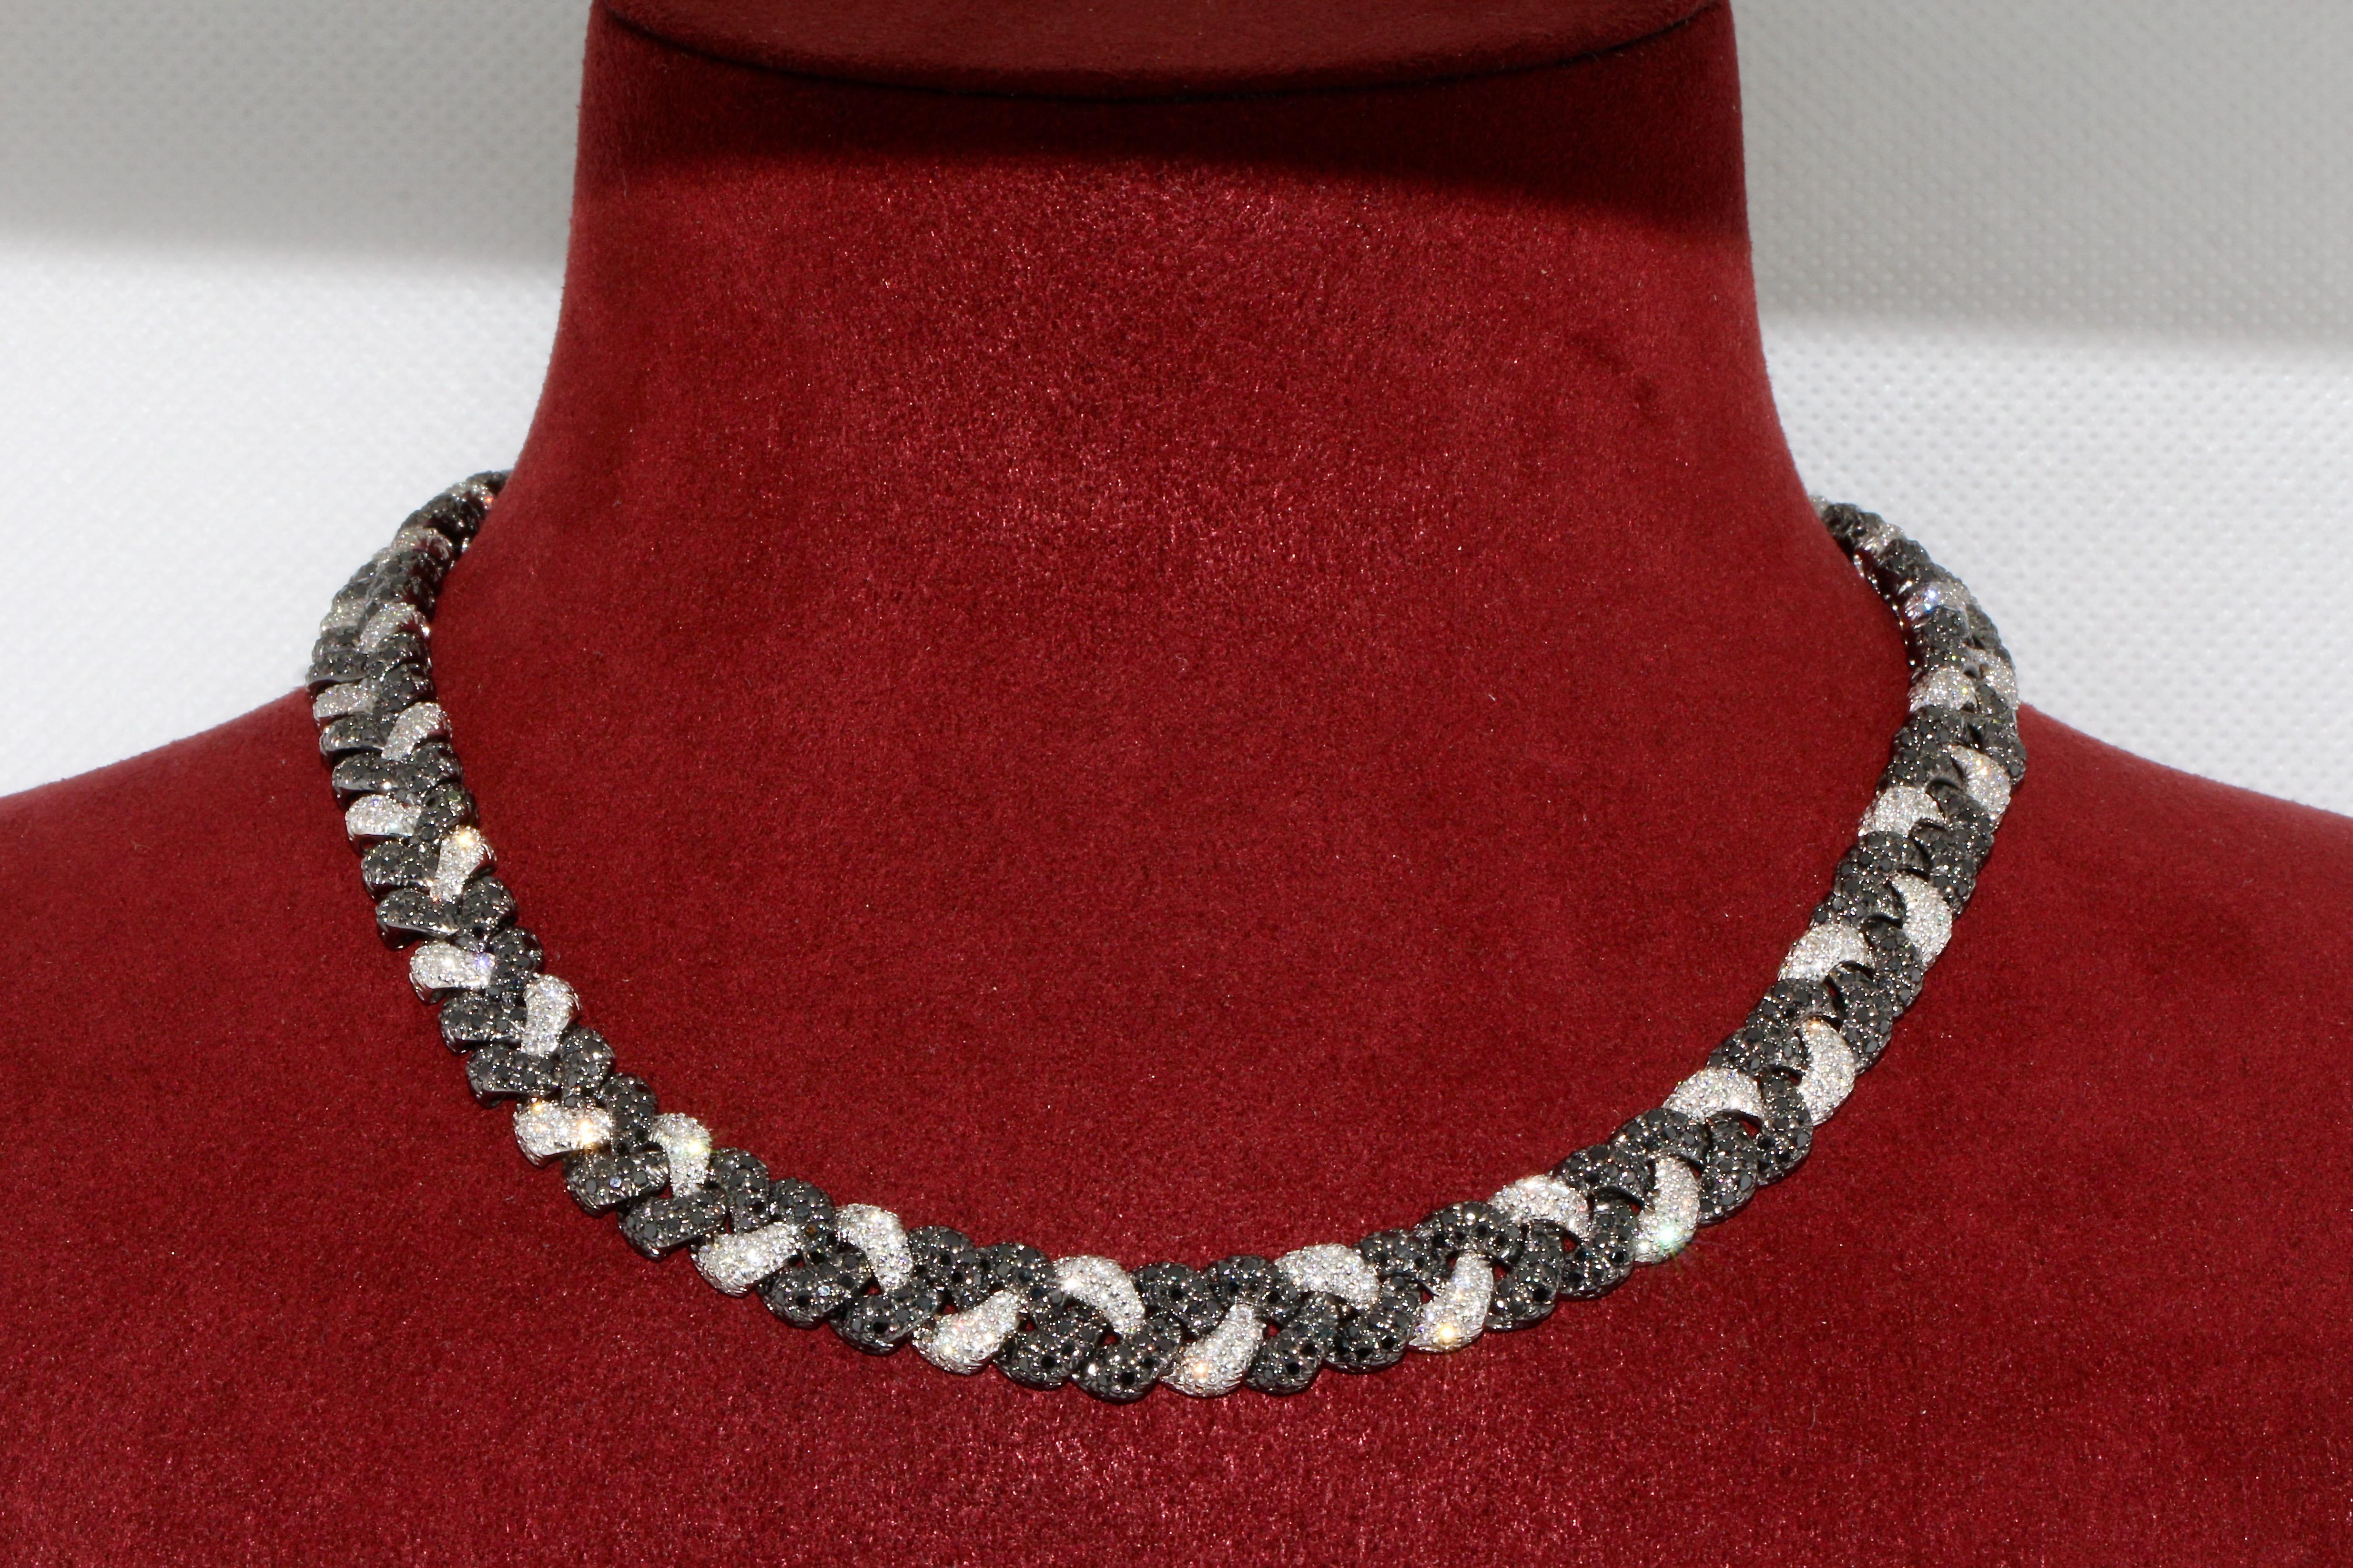 Necklace, Collier, 18 Karat White Gold, Set with White and Black Diamonds For Sale 1